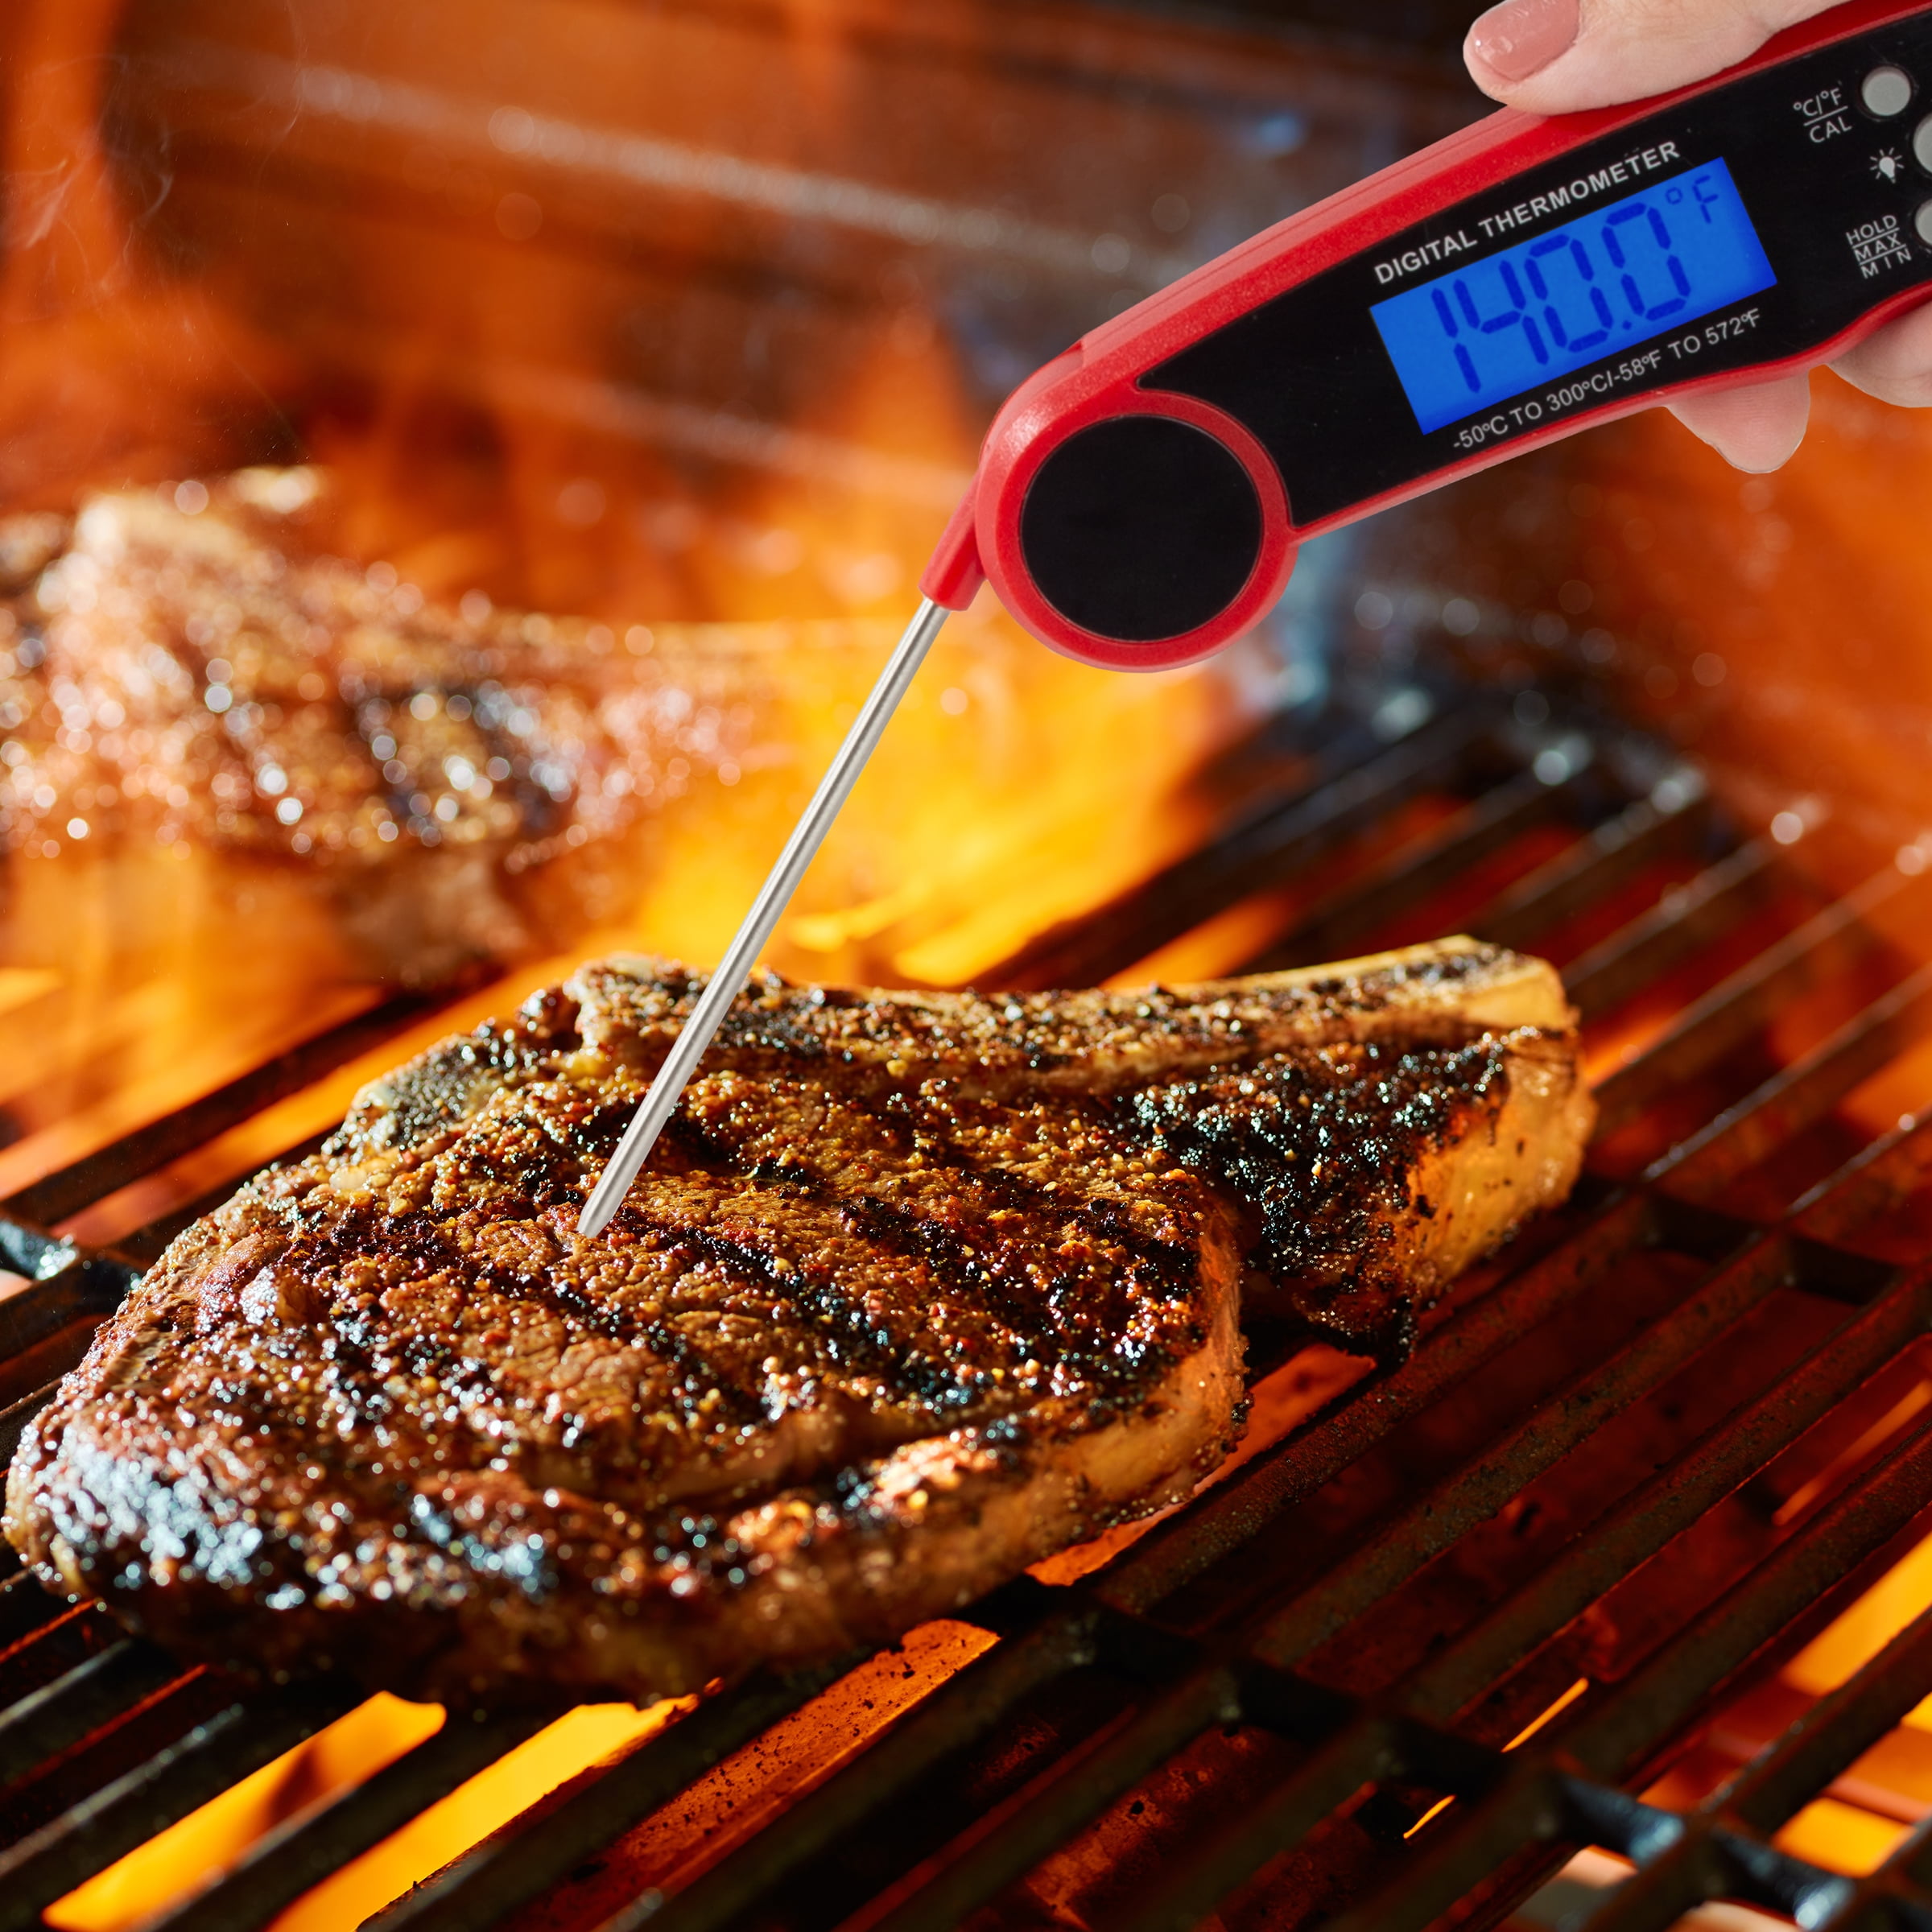 Waterproof Digital Kitchen Thermometer - Manny's Choice Pure Italian &  European Foods